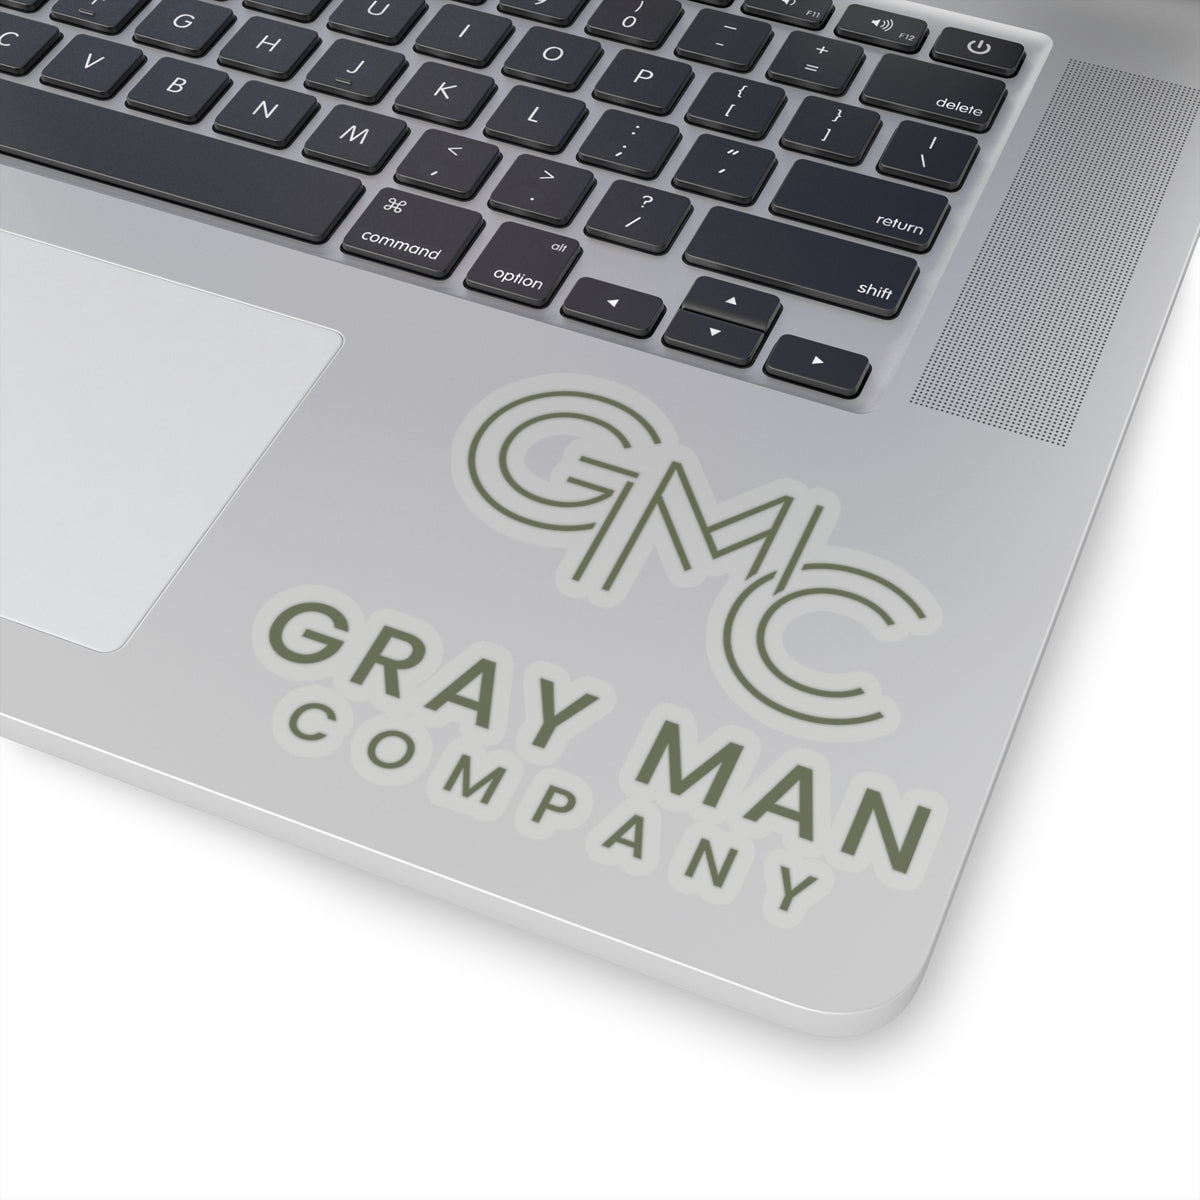 Gray Man Company OFFICIAL Stickers (OD Green)